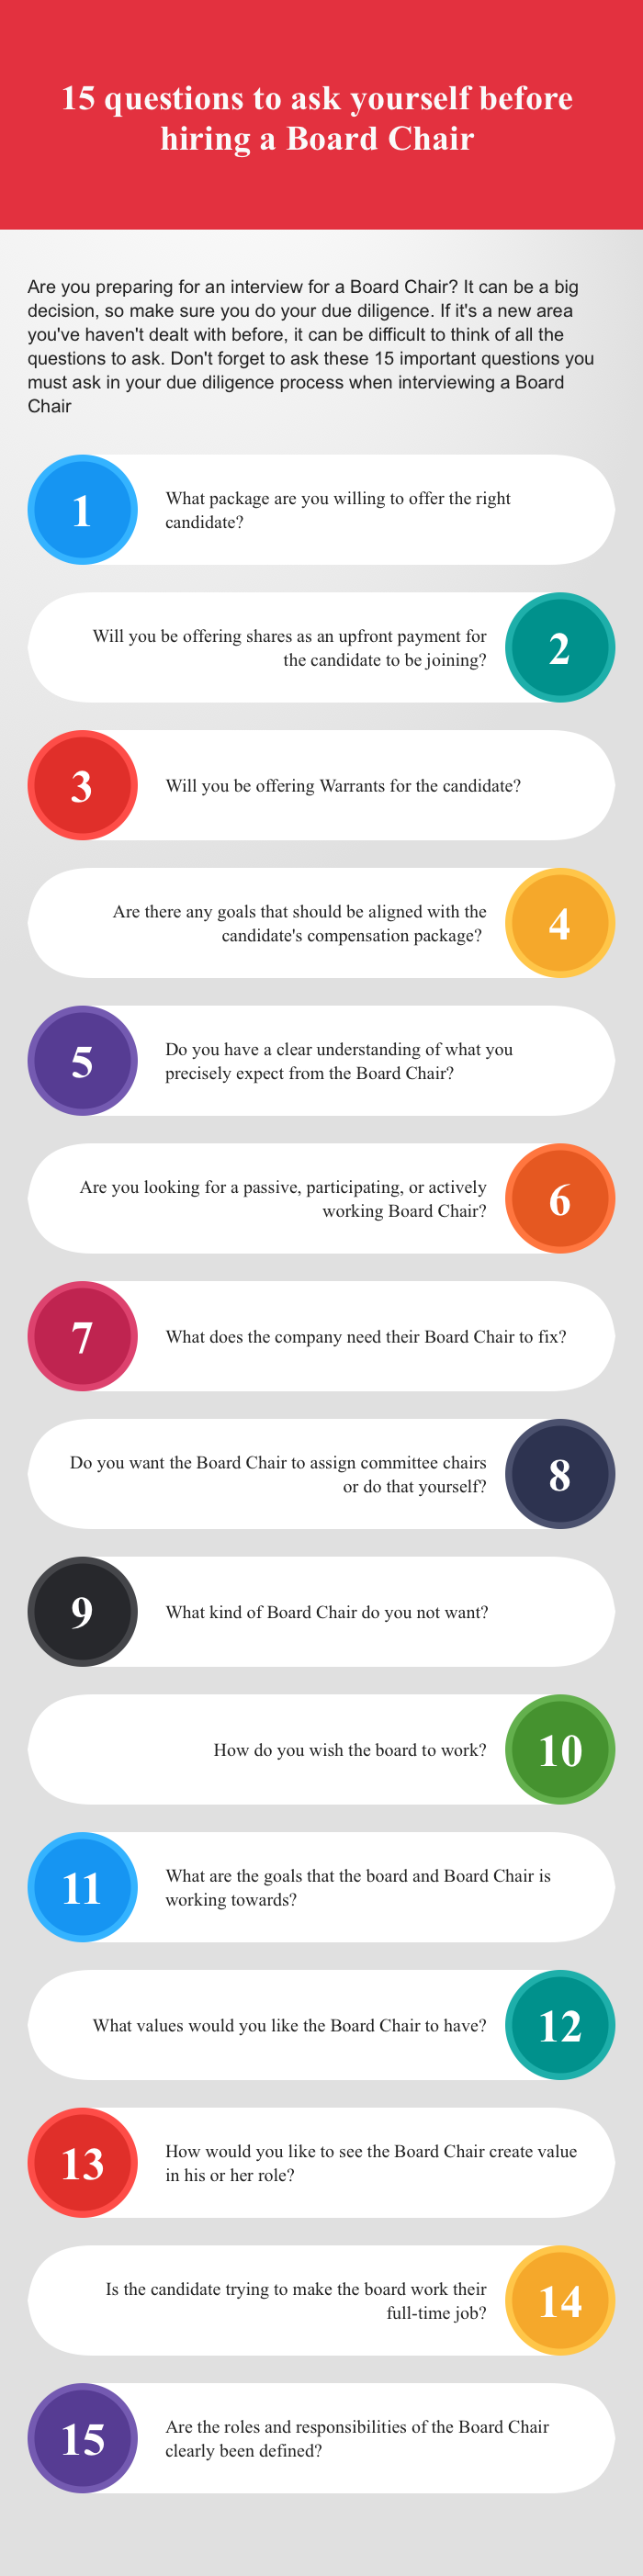 15 questions to ask yourself before hiring a Board Chair